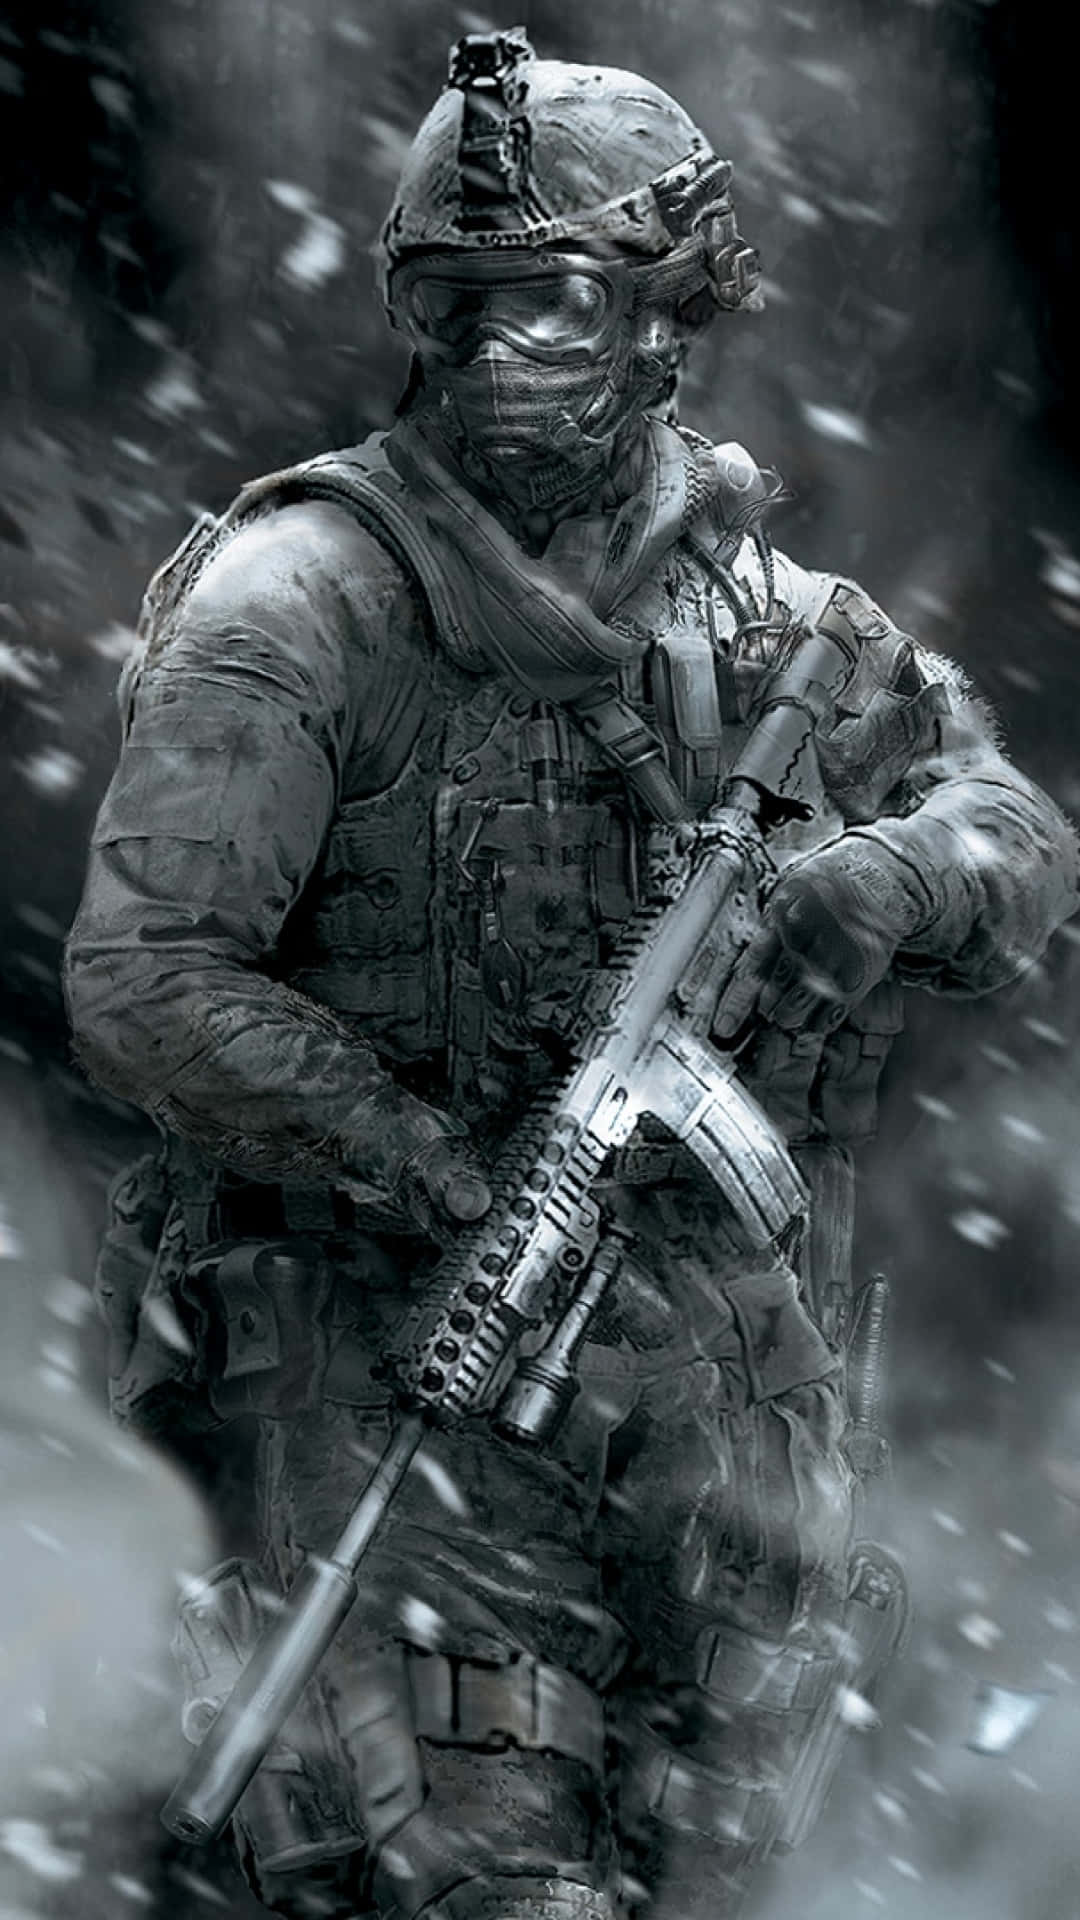 Intense Call of Duty Gameplay in Action Wallpaper